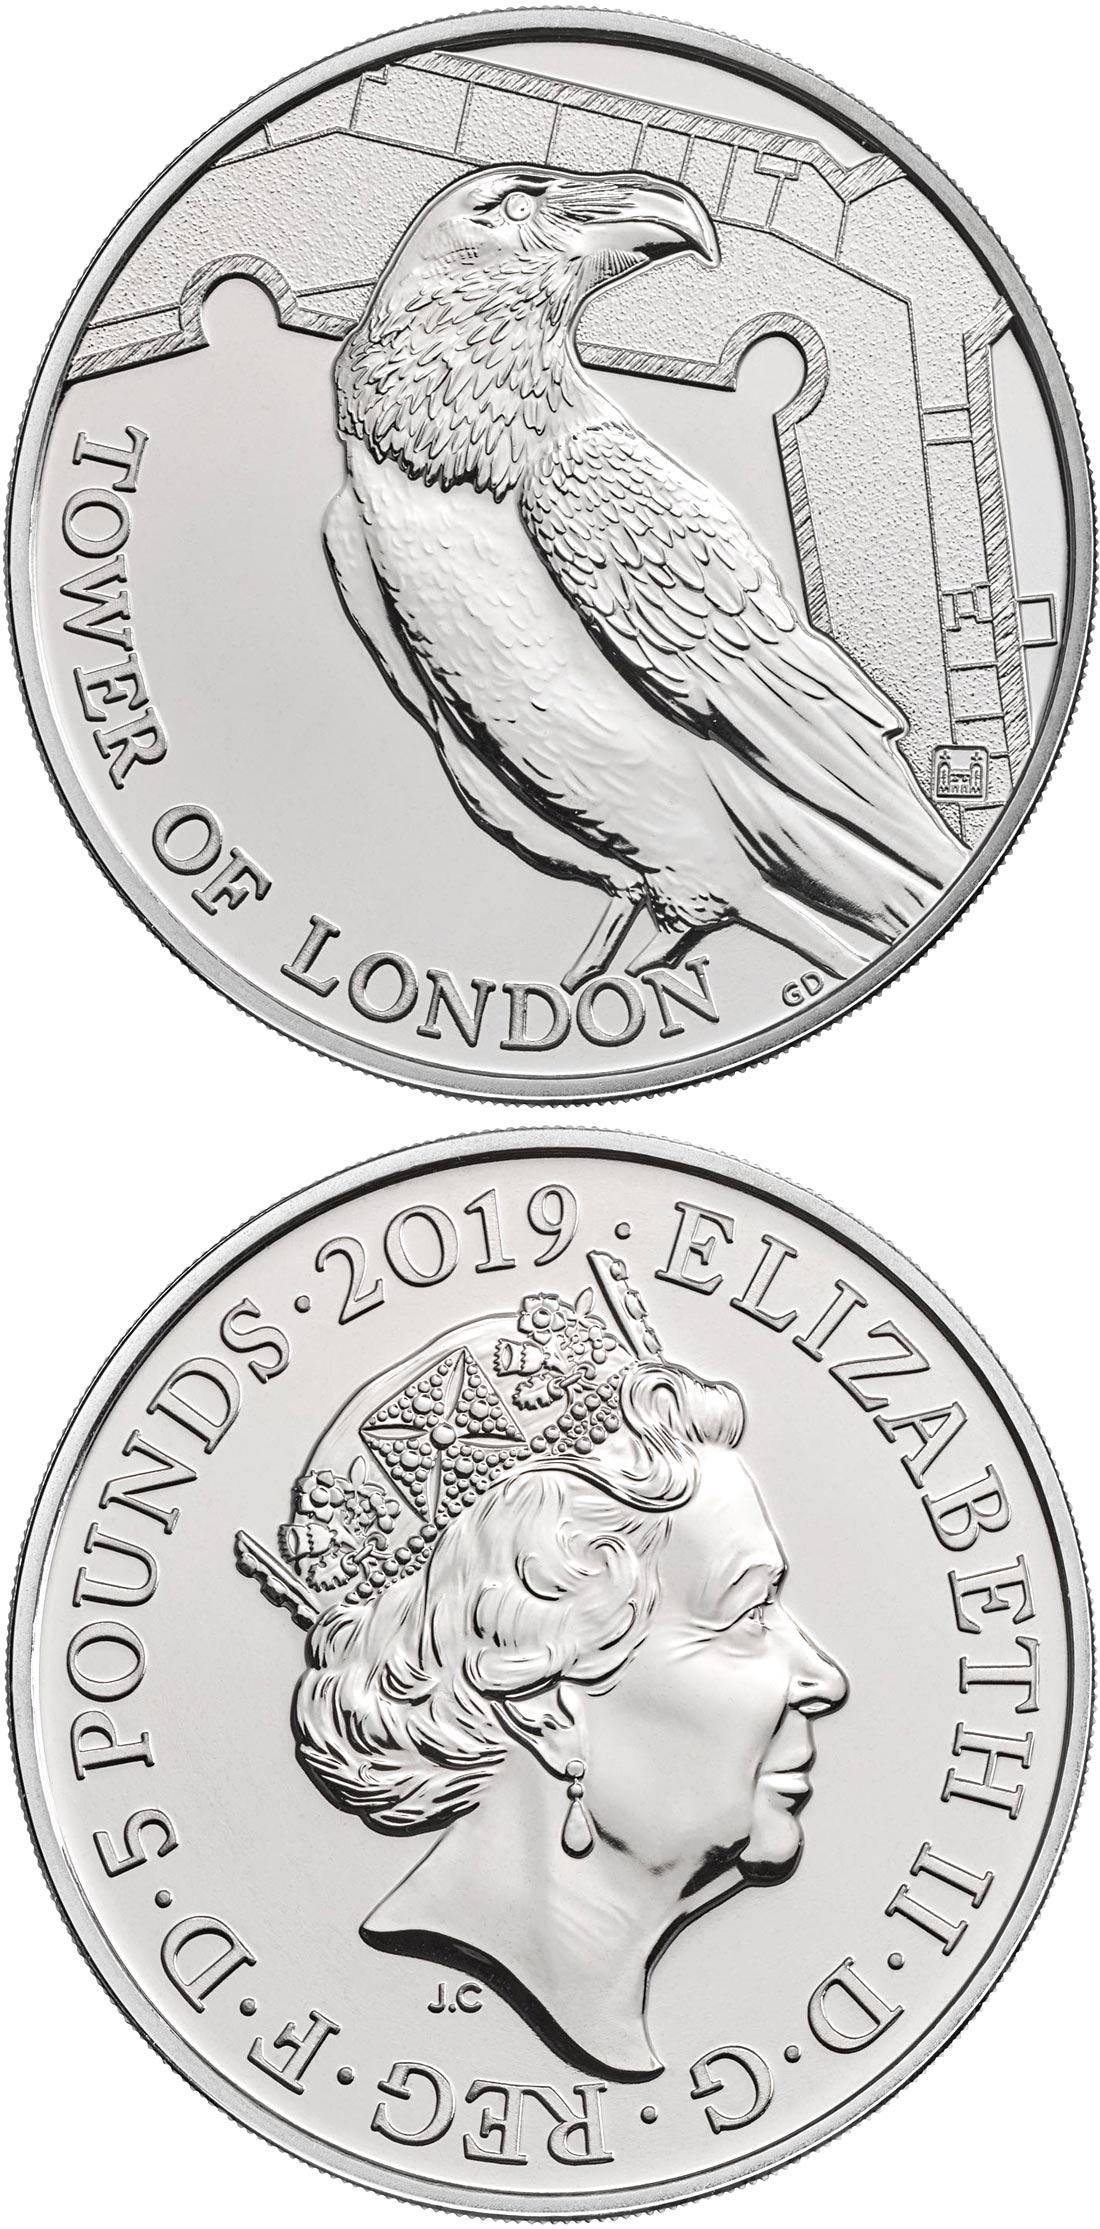 Image of 5 pounds coin - Legend of the Ravens | United Kingdom 2019.  The Copper–Nickel (CuNi) coin is of BU quality.